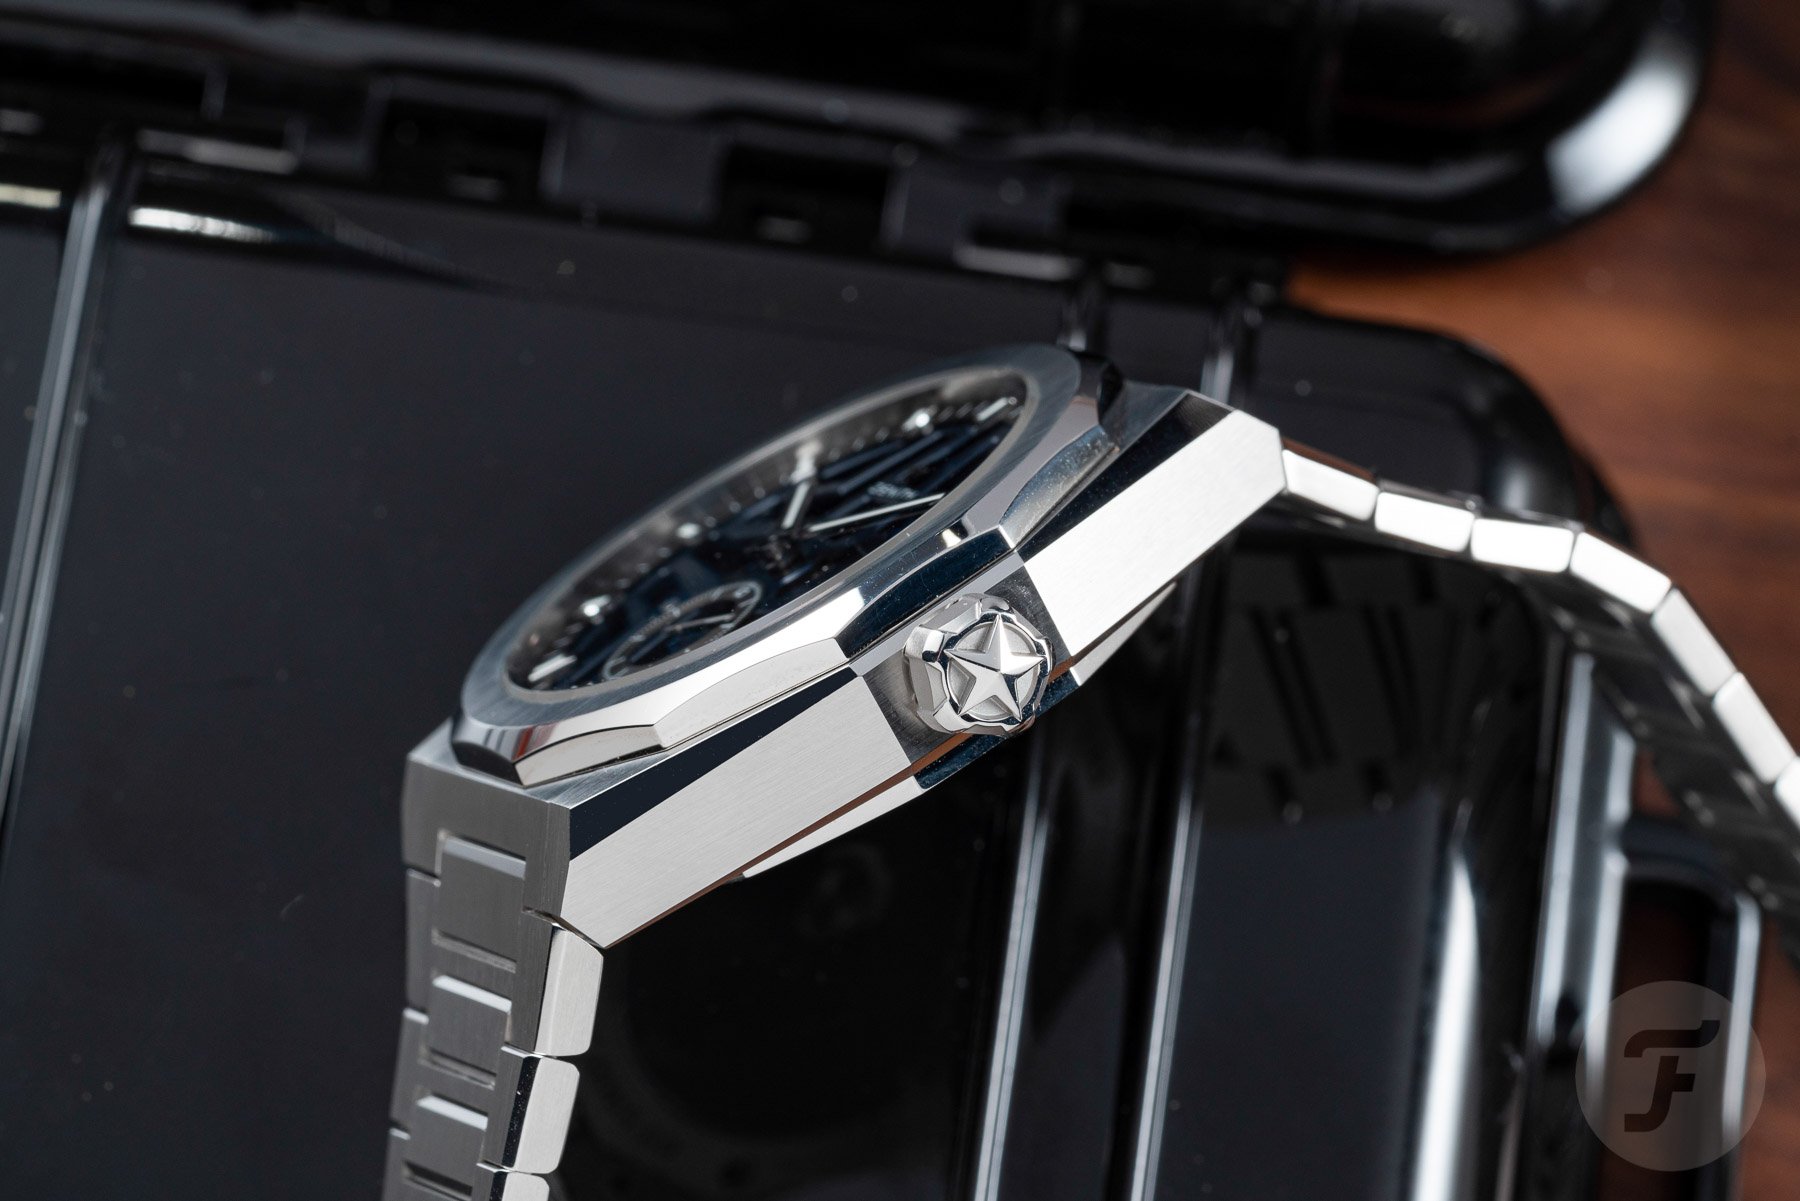 The new Zenith Defy Skyline Skeleton - Today on the wrist - An